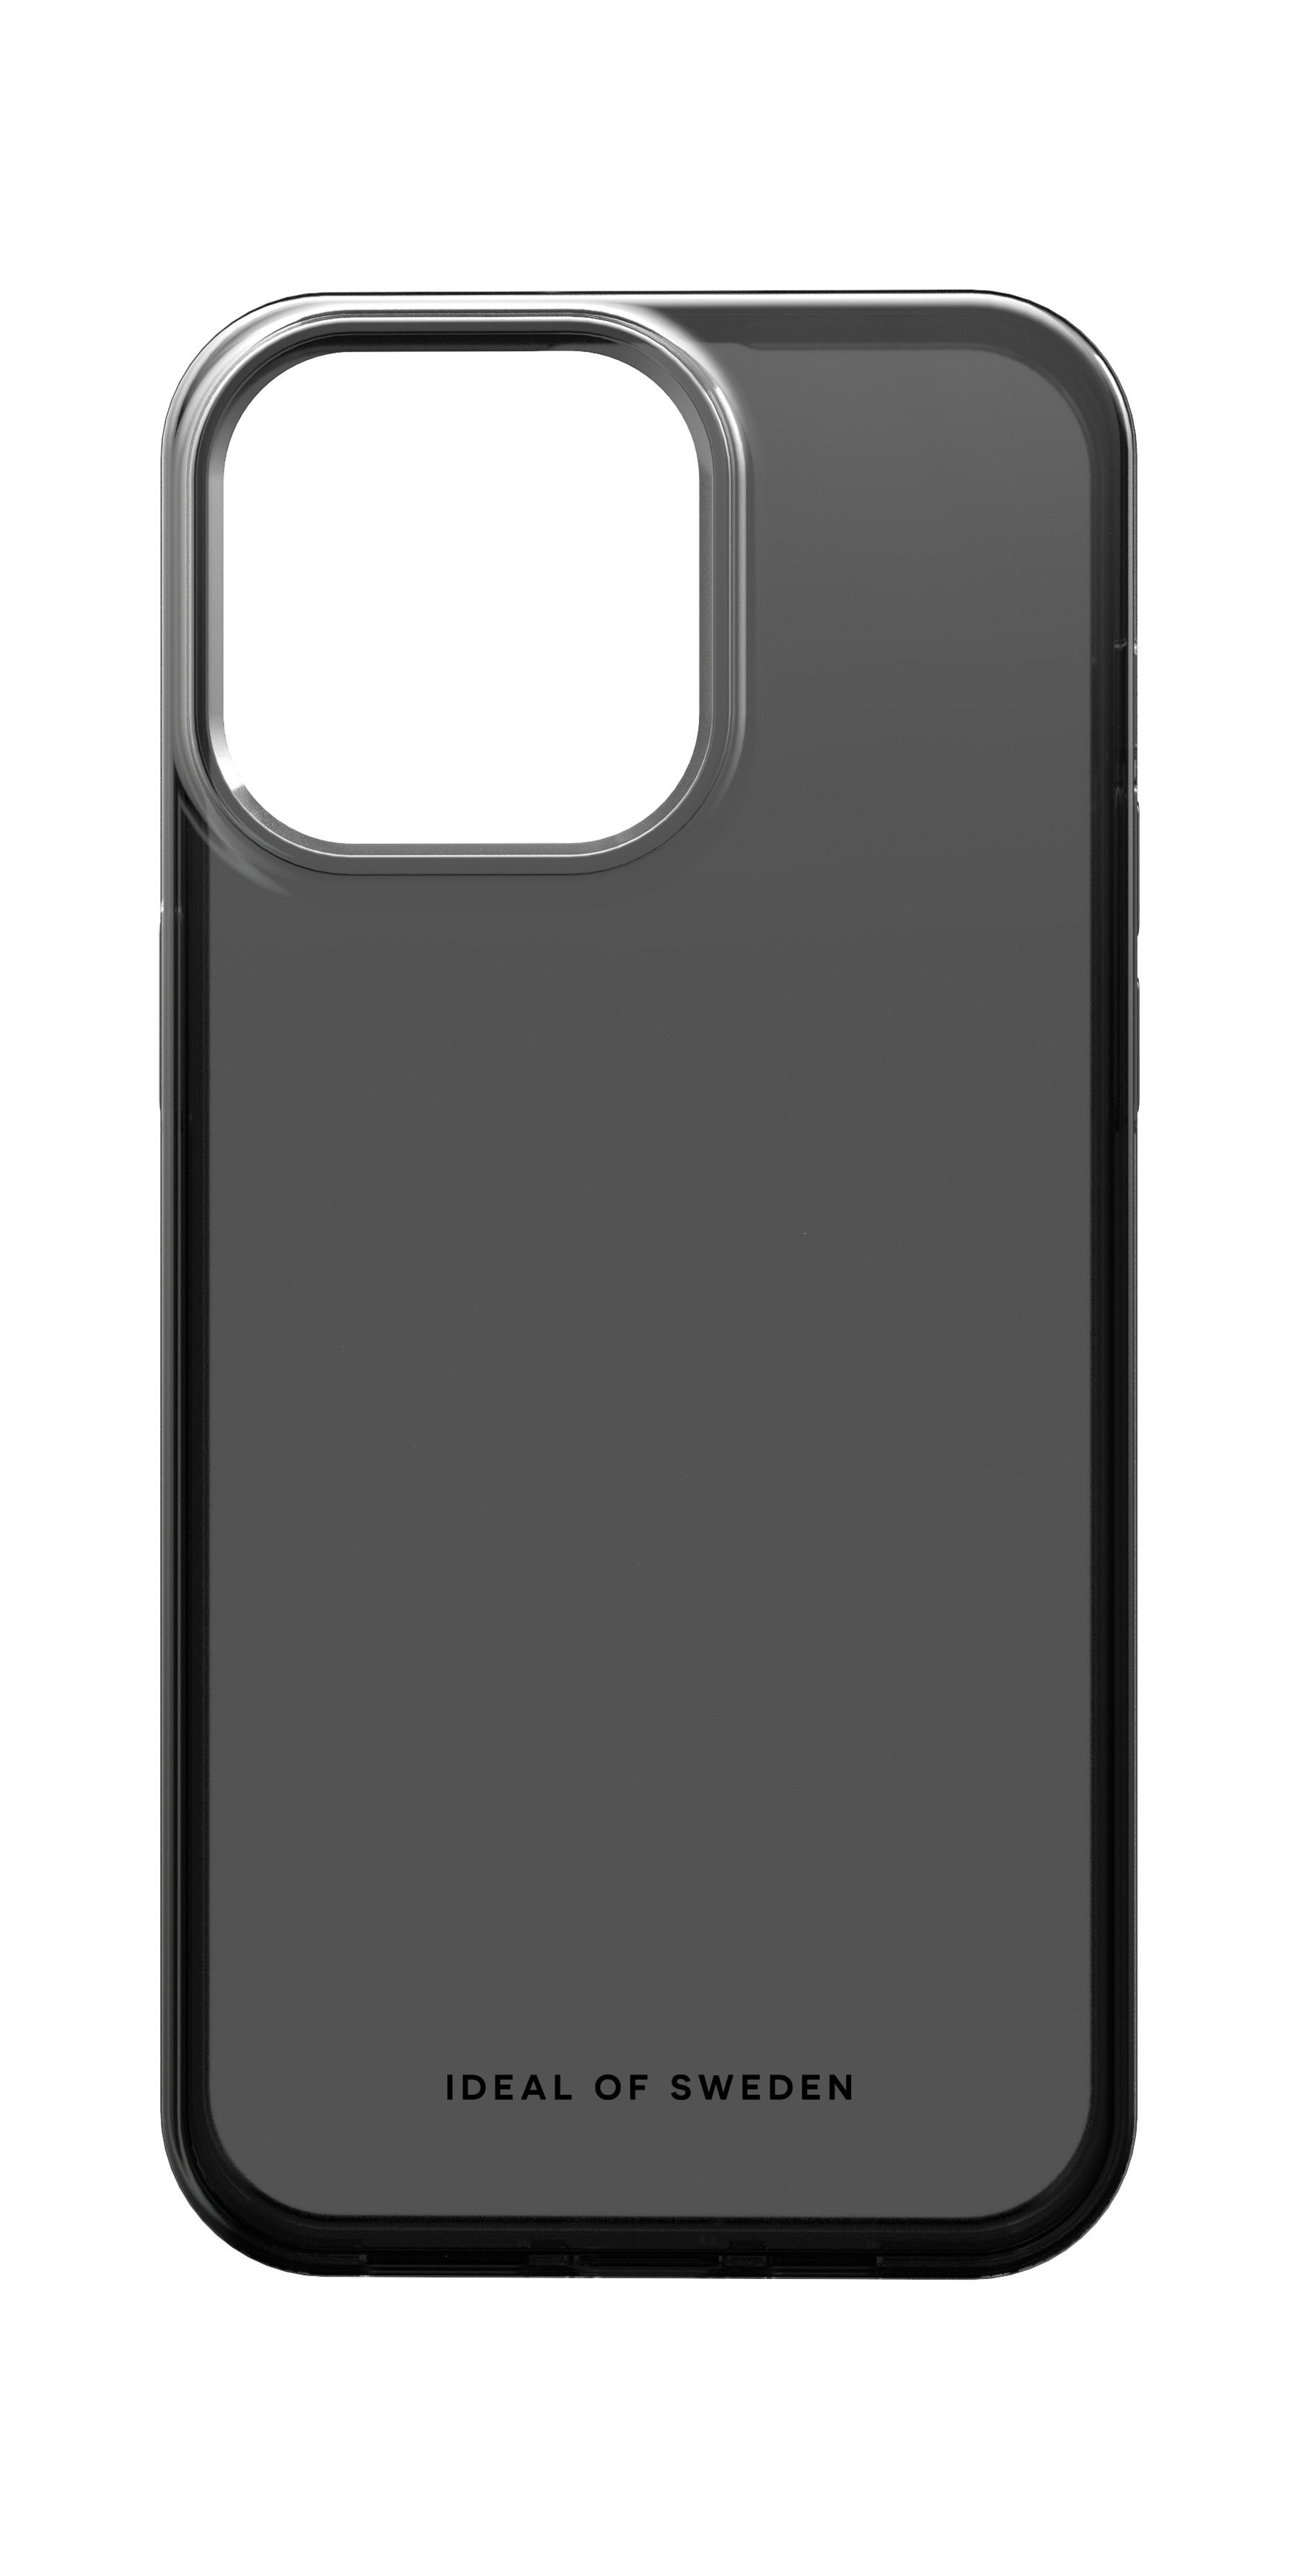 Clear Max, Apple, Backcover, Black SWEDEN IDEAL iPhone Tinted Pro 15 OF Case,